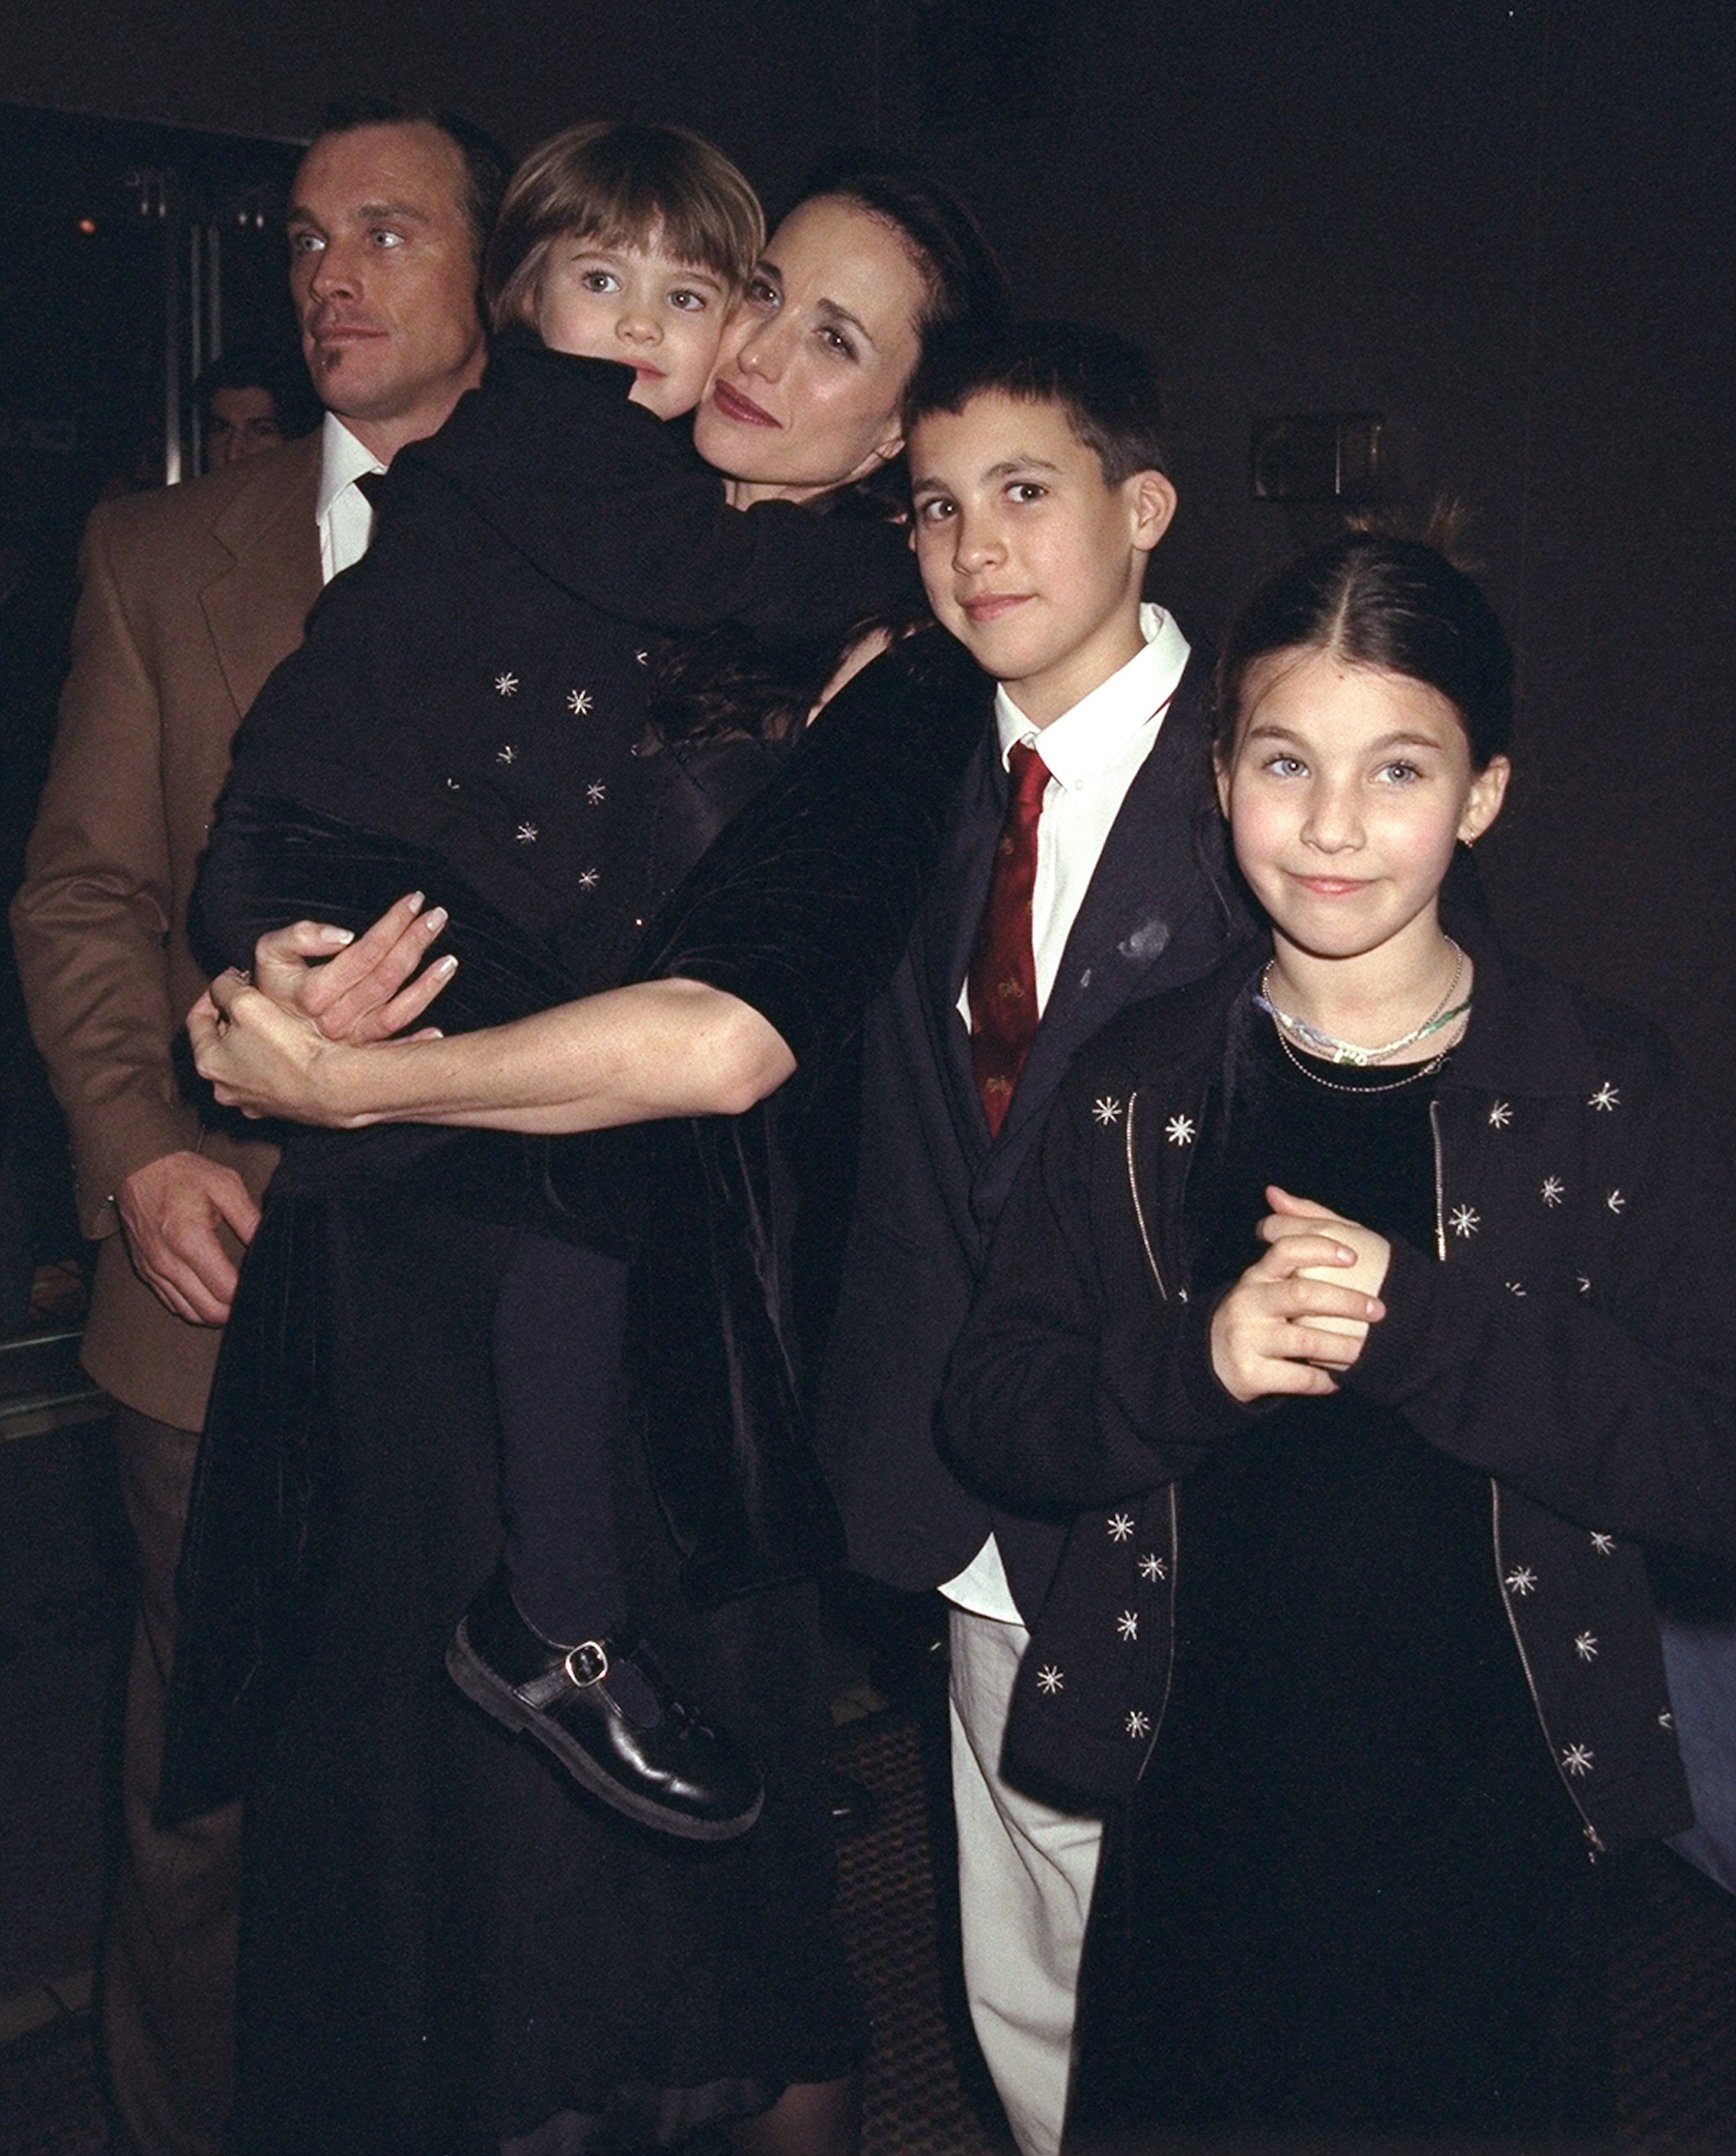 Andie MacDowell and husband Paul Qualley with family at the premiere of "Just the Ticket" at Cinema 2 on February 18, 1999 in New York | Source: Getty Images 